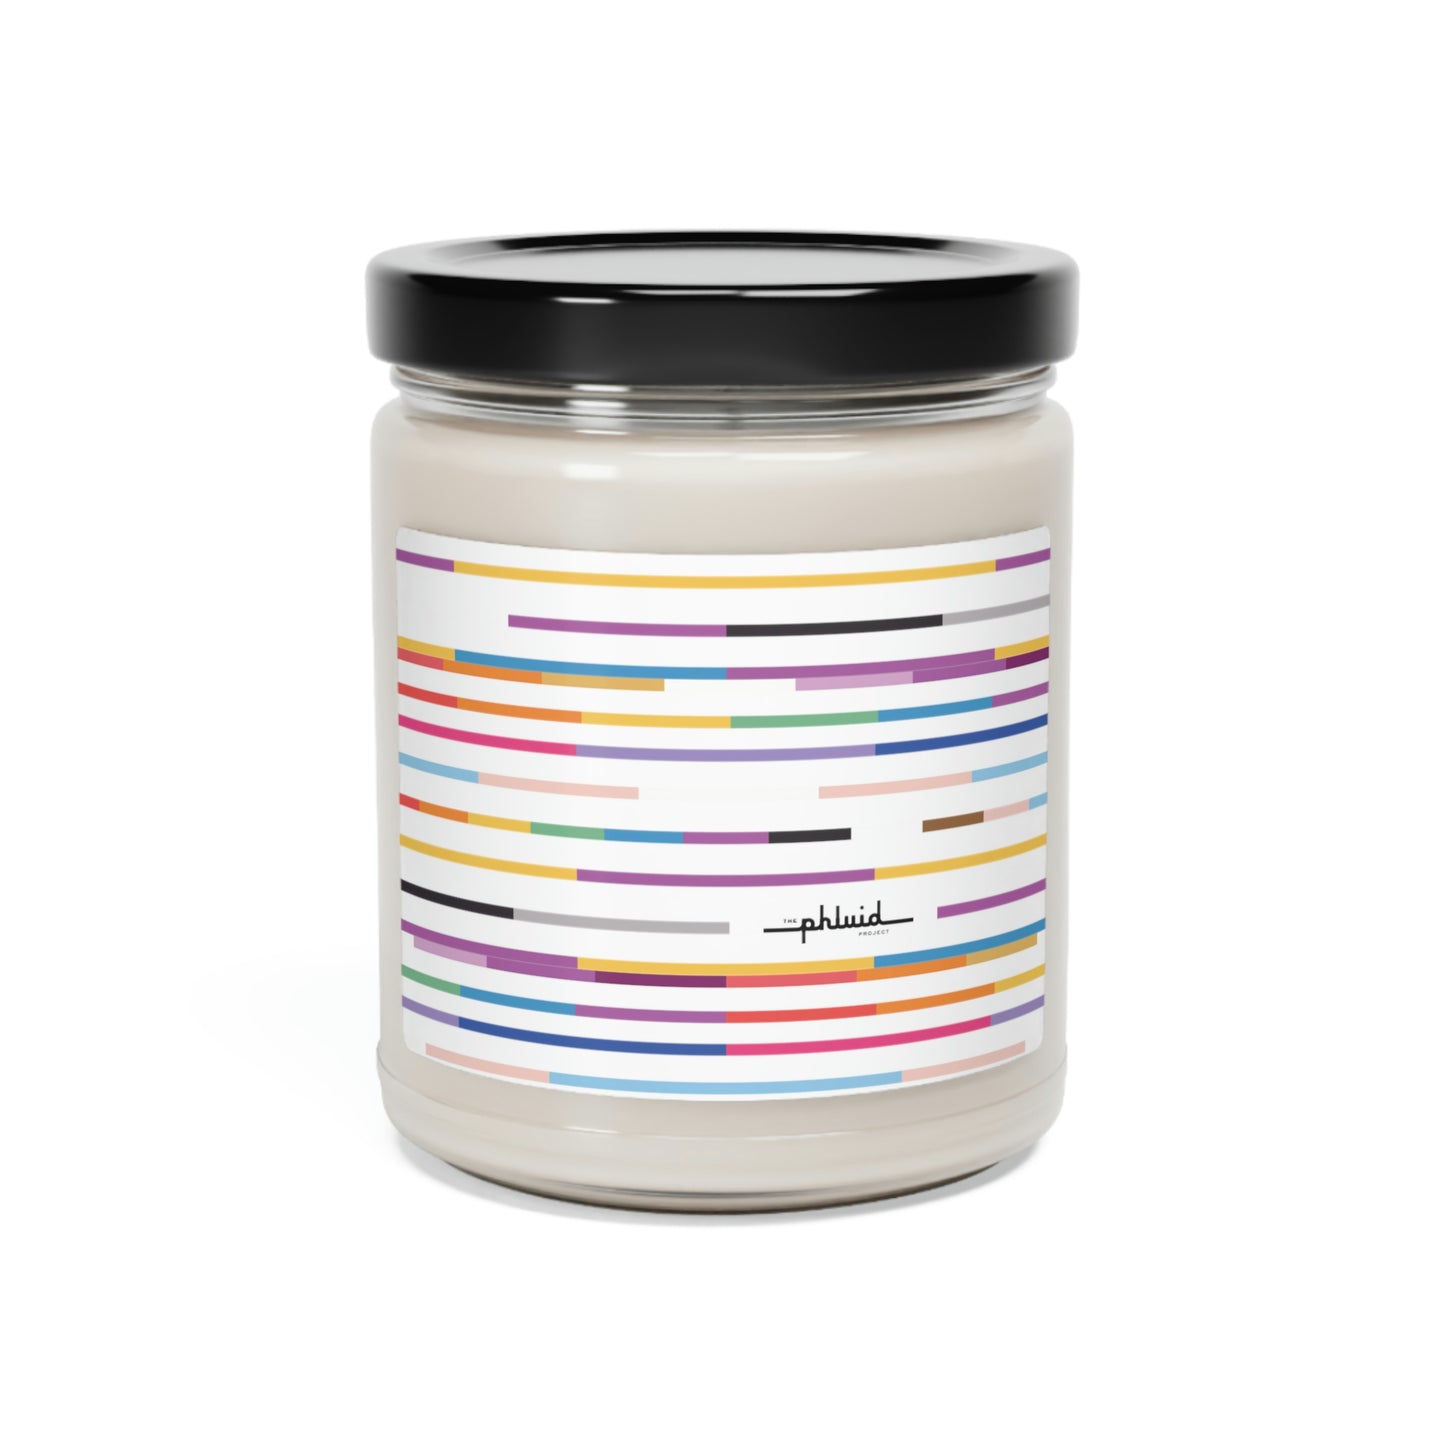 Phluid Stripe Scented Soy Candle, 9oz